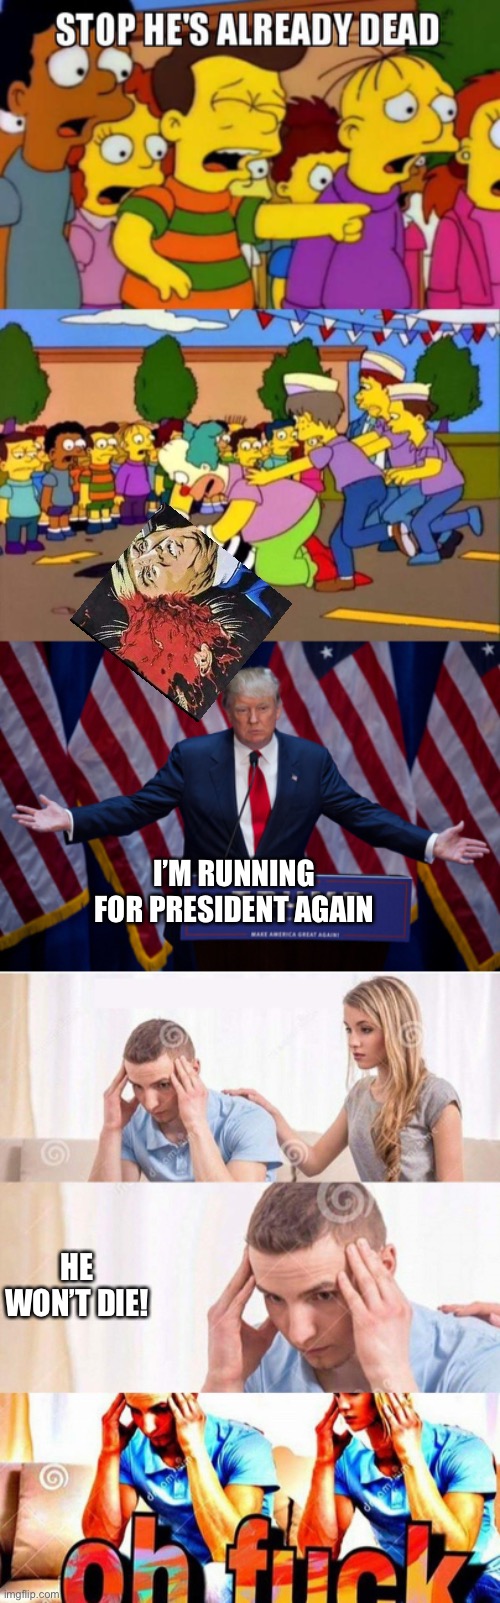 I’M RUNNING FOR PRESIDENT AGAIN HE WON’T DIE! | image tagged in stop he's already dead,donald trump,oh fuck | made w/ Imgflip meme maker